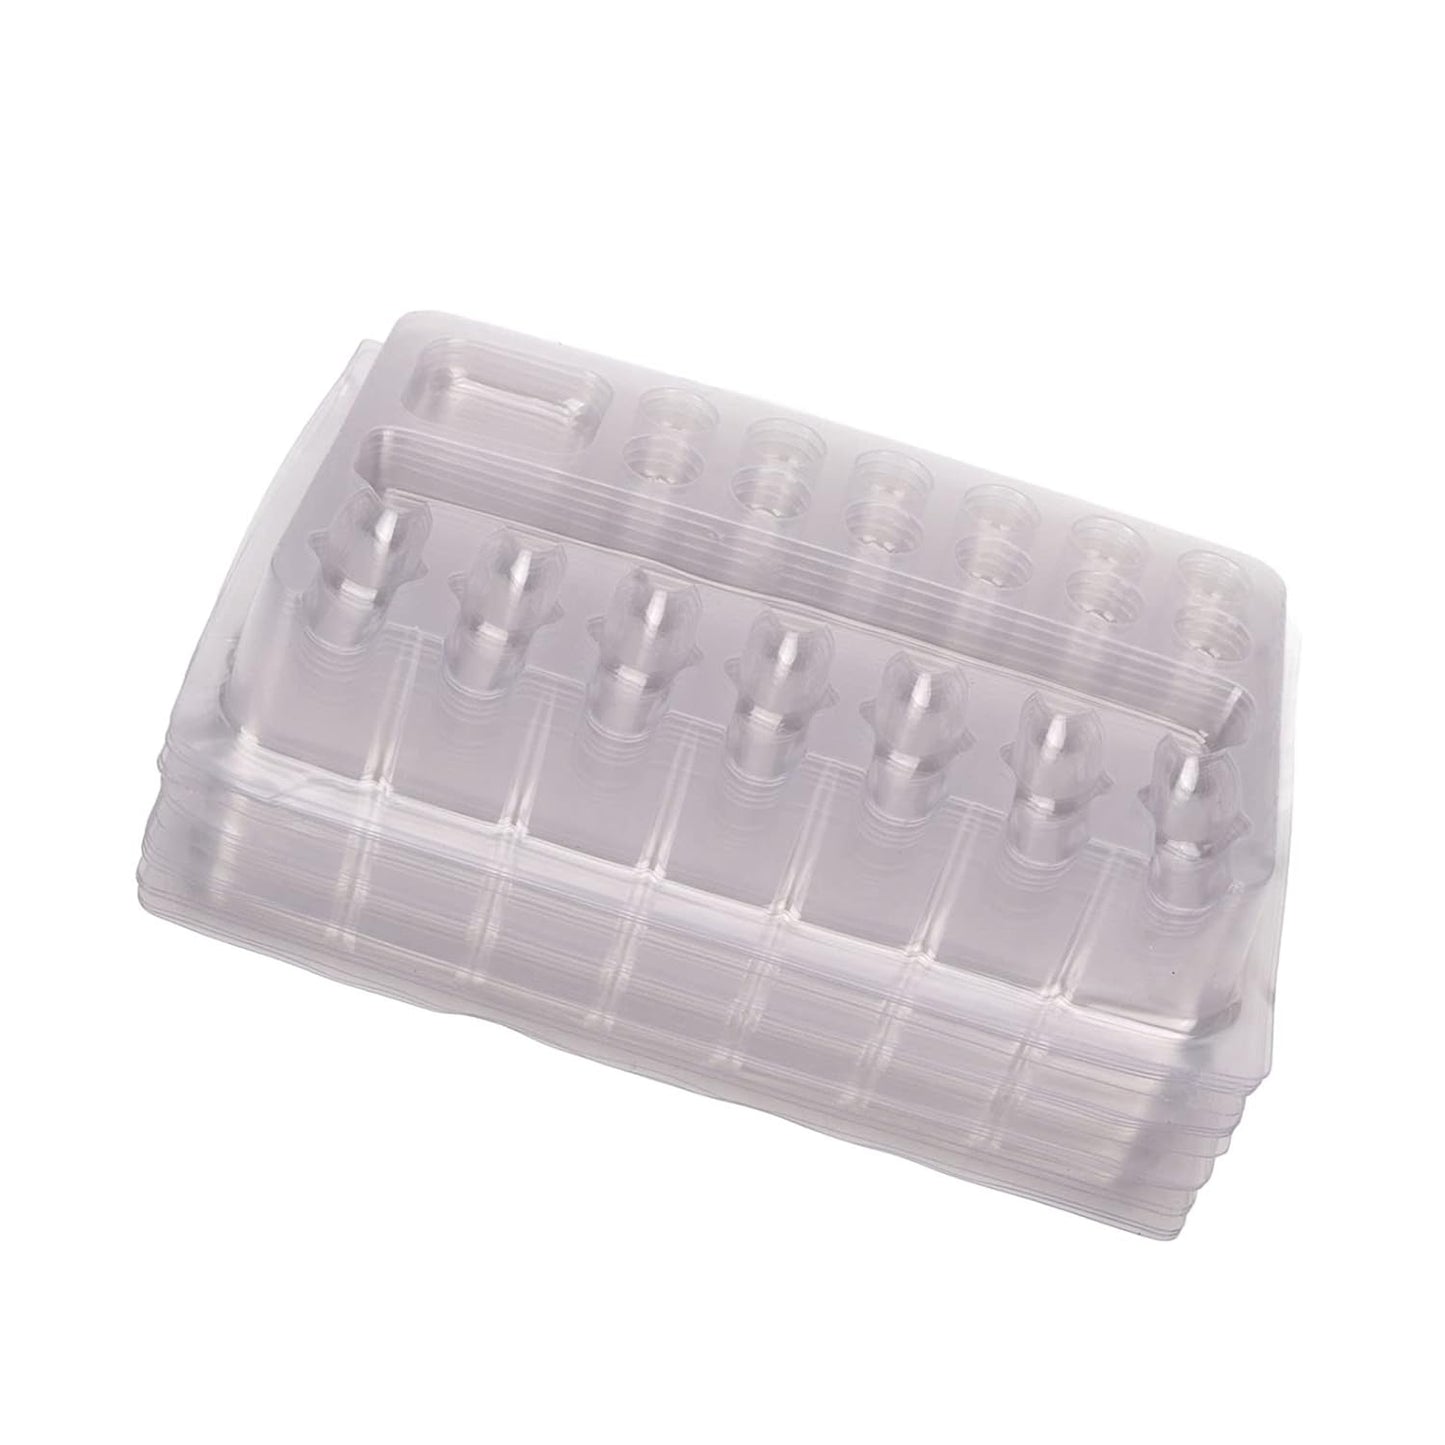 Disposable Cartridge Tray